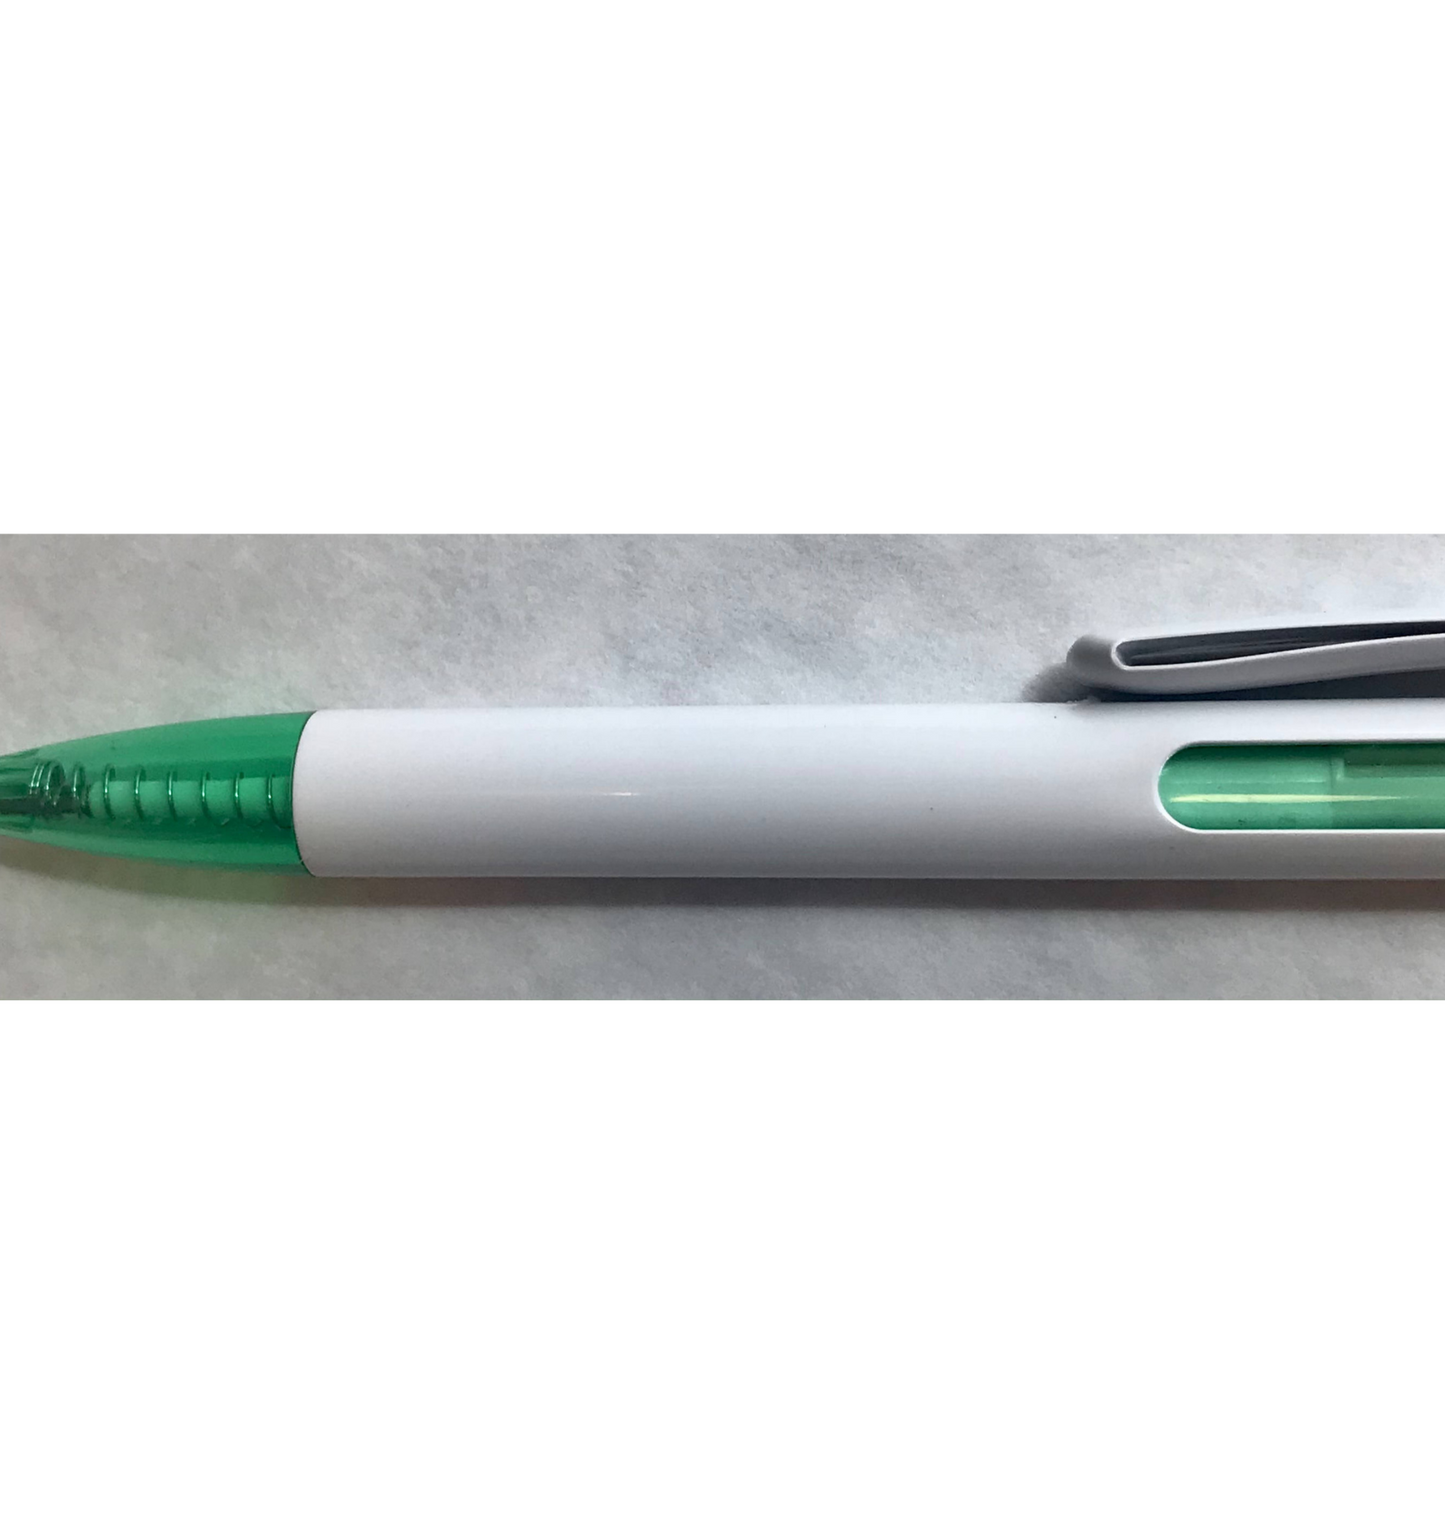 The Groove Pen